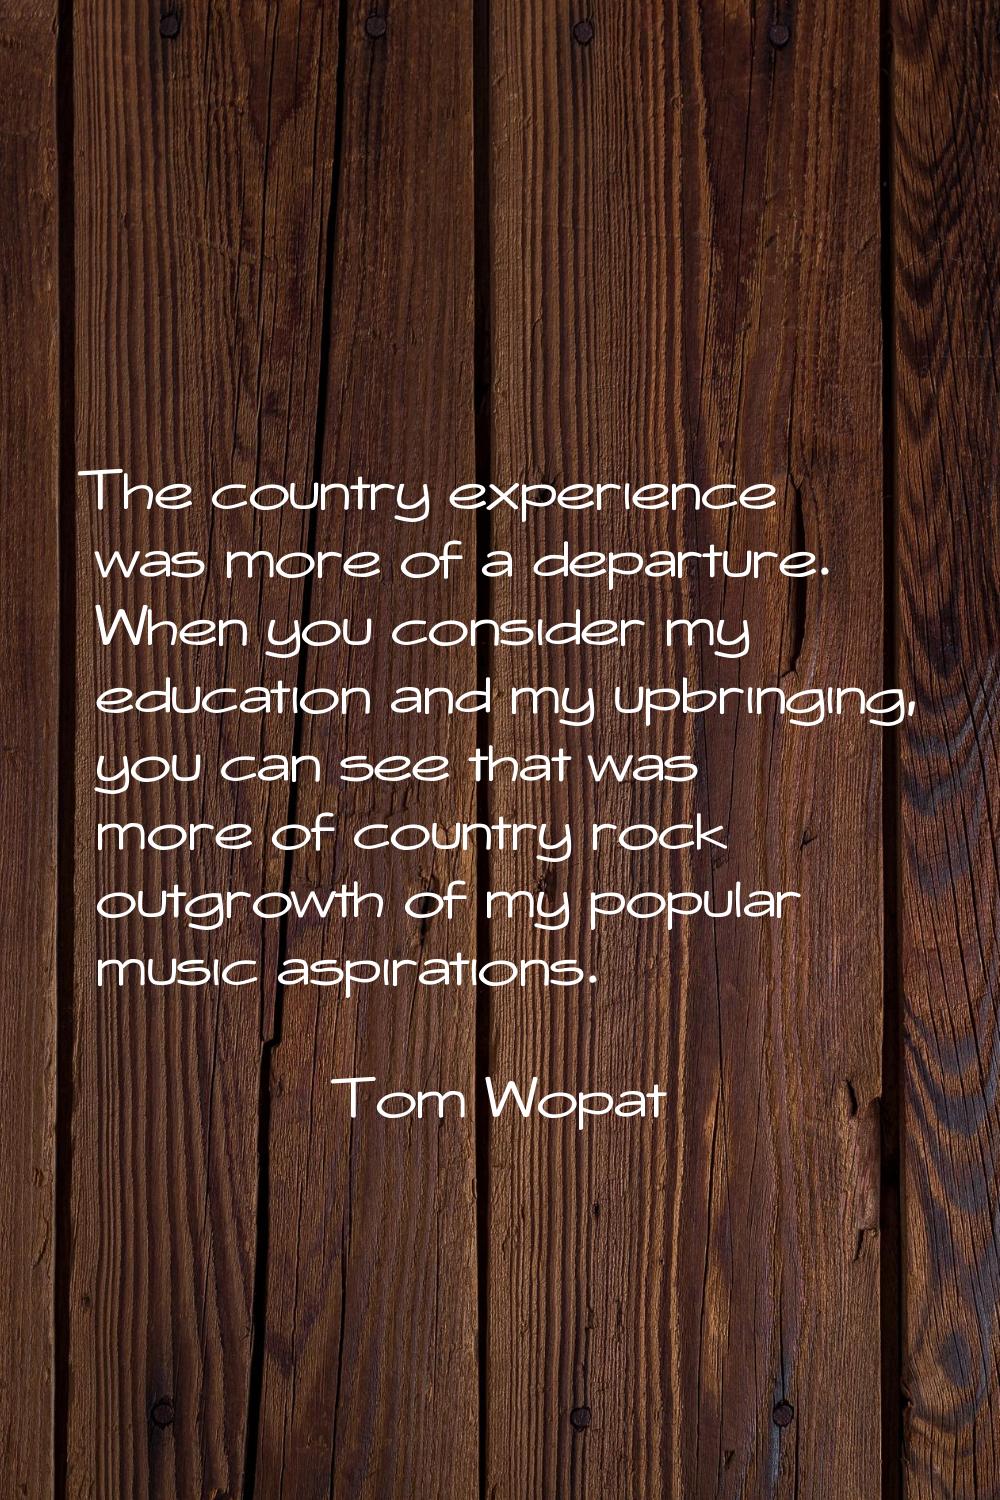 The country experience was more of a departure. When you consider my education and my upbringing, y